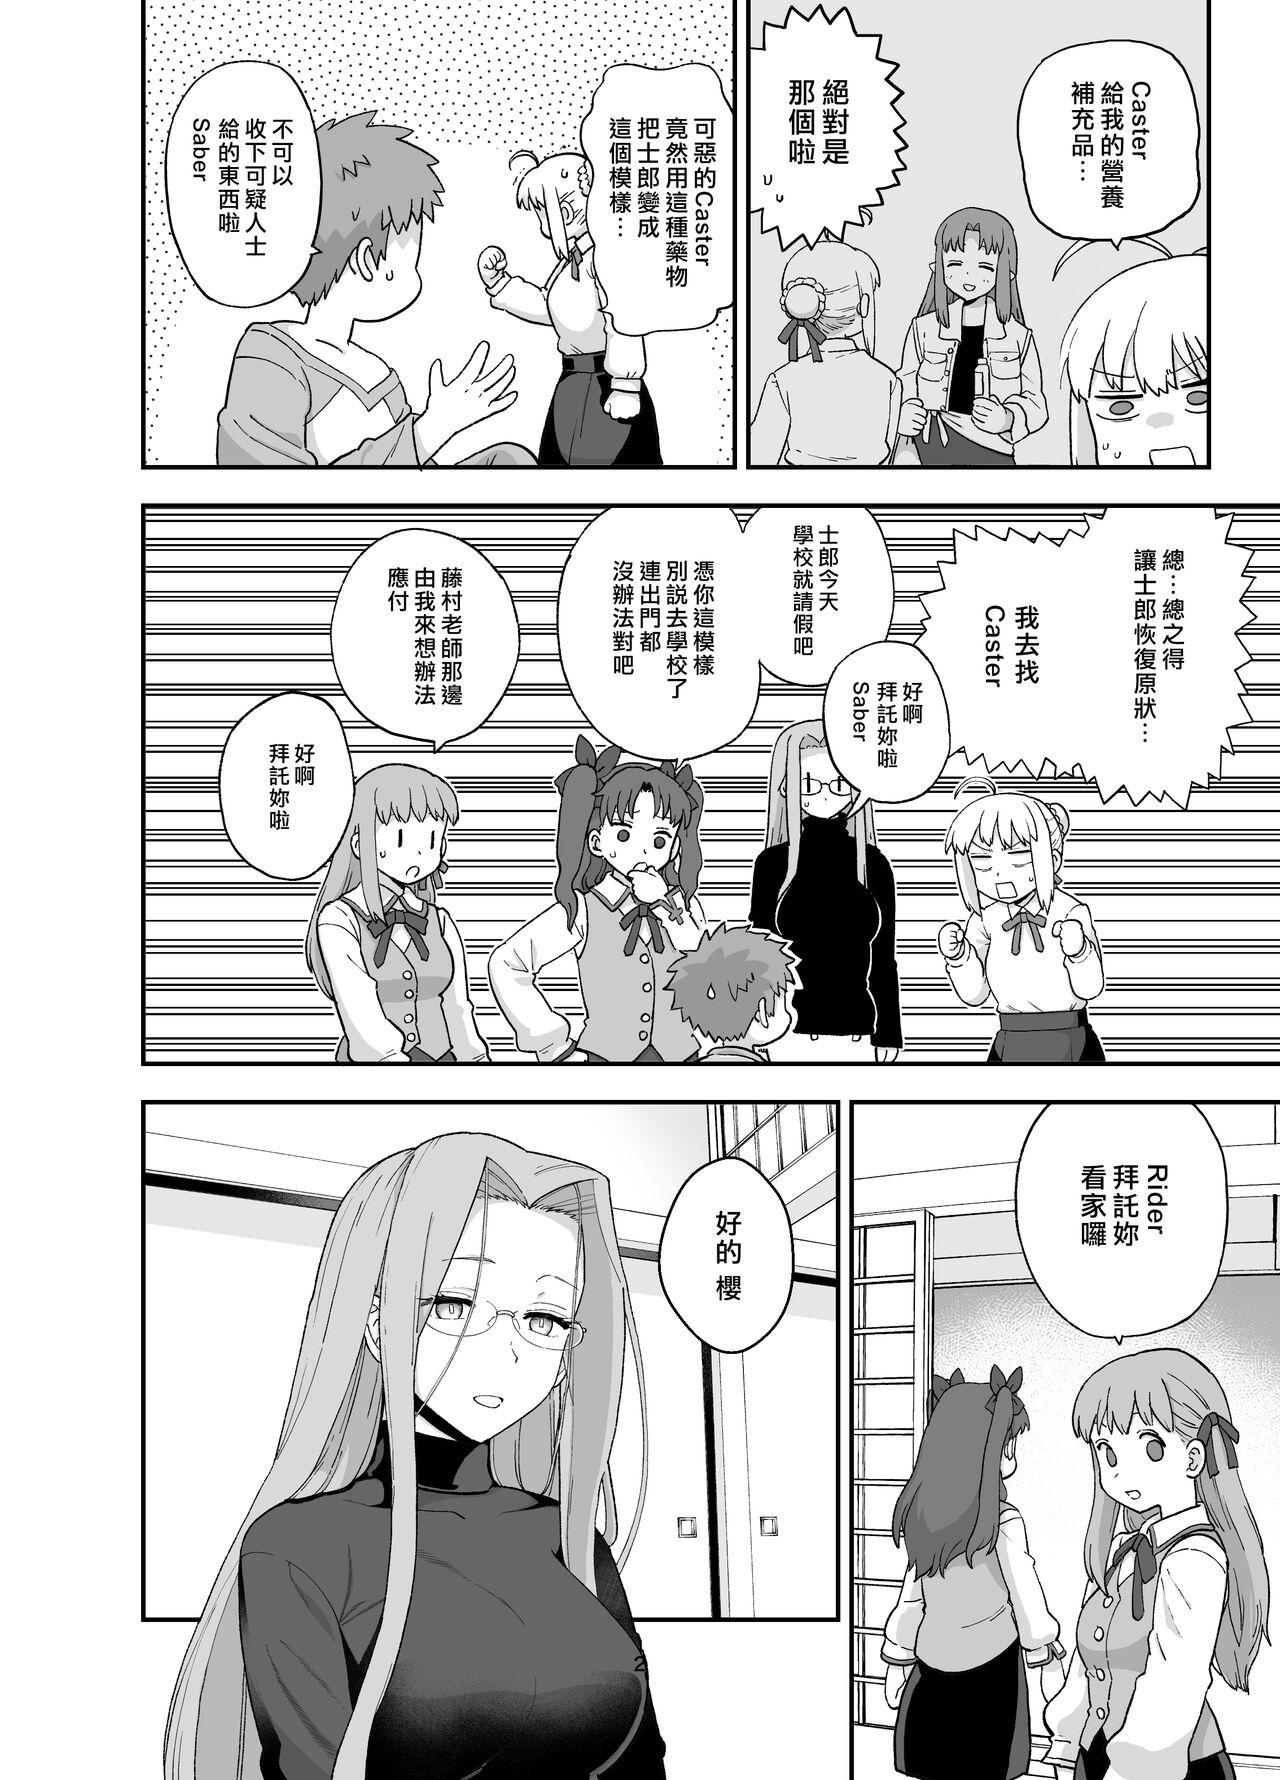 Puto Rider-san to Orusuban - Fate stay night Francaise - Page 5